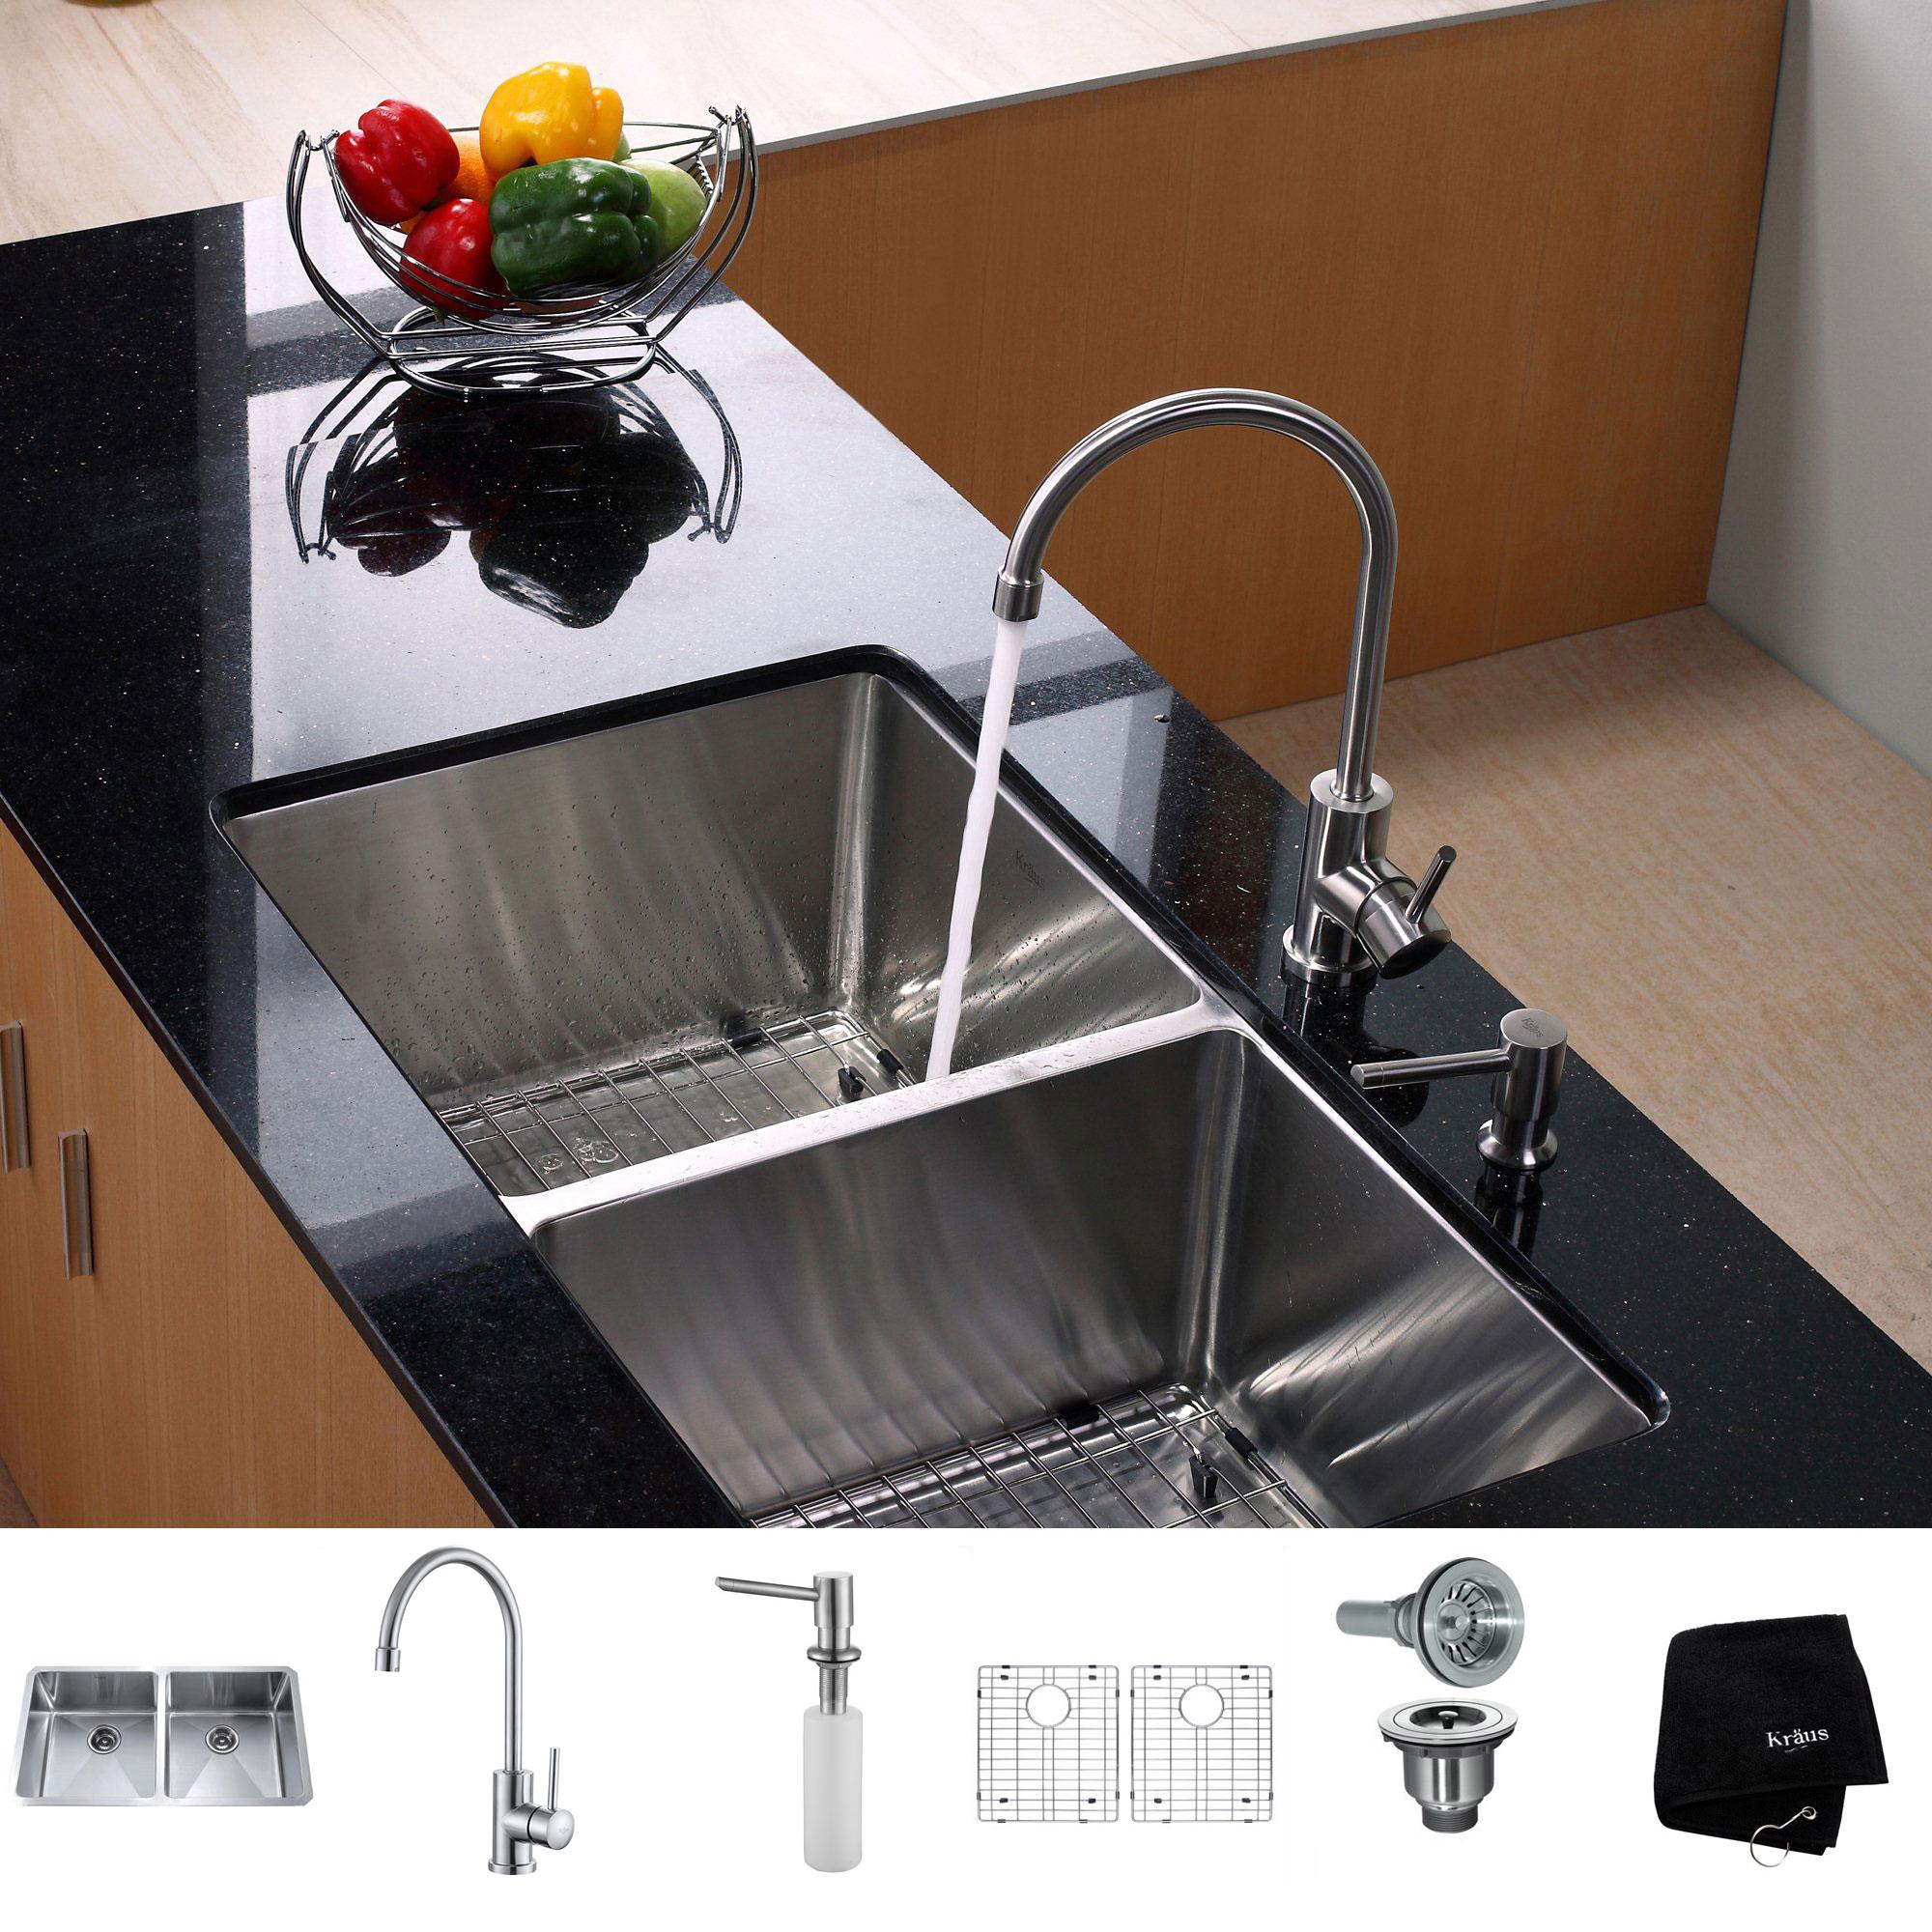 https://ak1.ostkcdn.com/images/products/4389944/Kraus-Kitchen-Combo-Set-Stainless-Steel-33-inch-Undermount-Sink-Faucet-L12354528.jpg